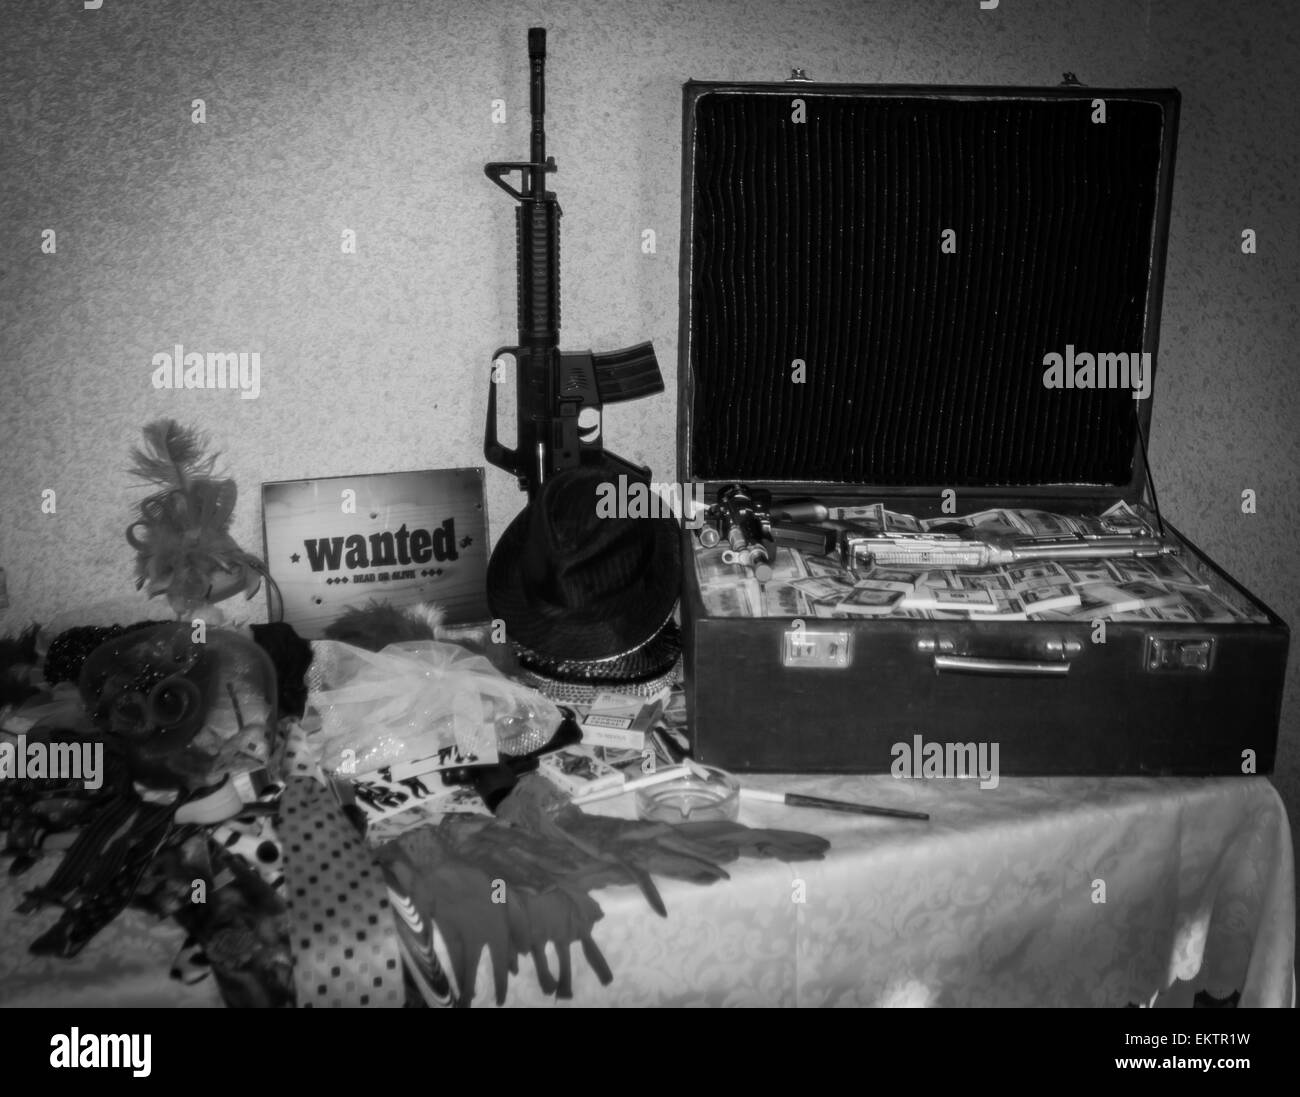 Large suitcase of money, weapons, and the plate is wanted Stock Photo